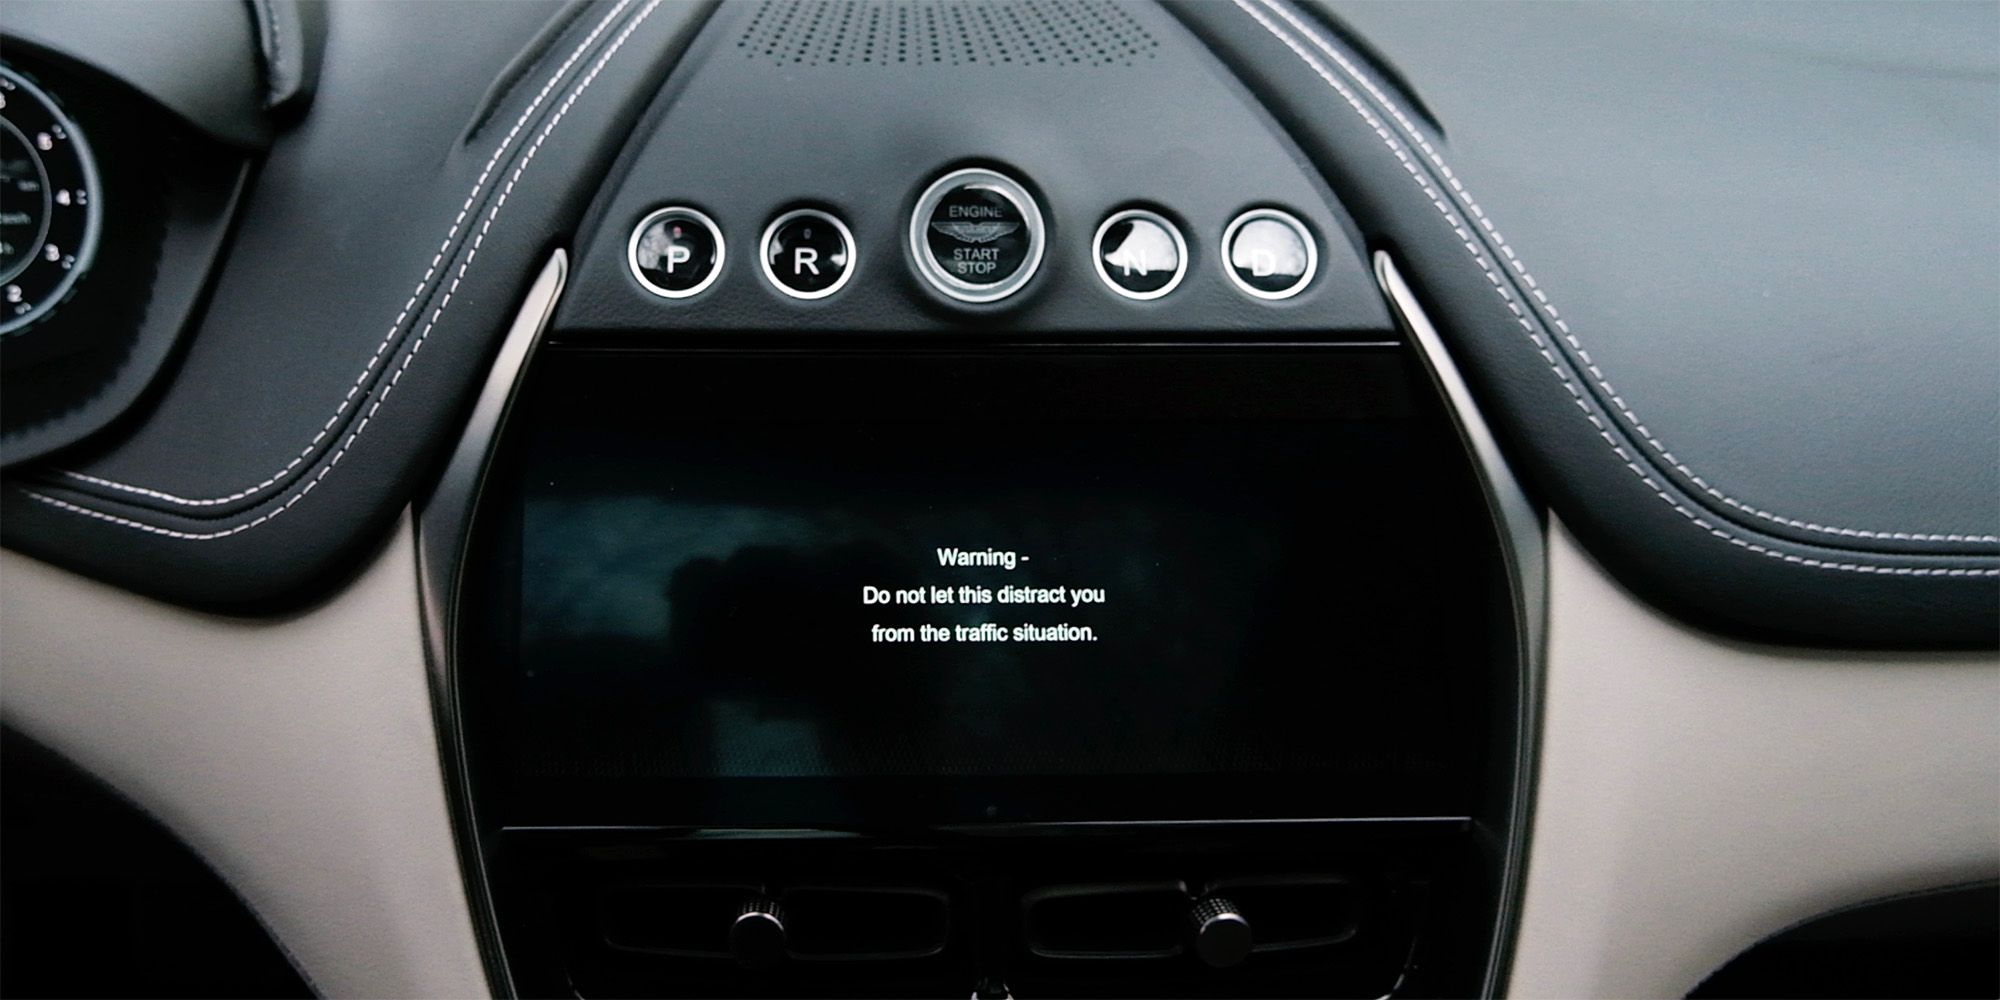 Aston Martin DBX infotainment screen and transmission buttons